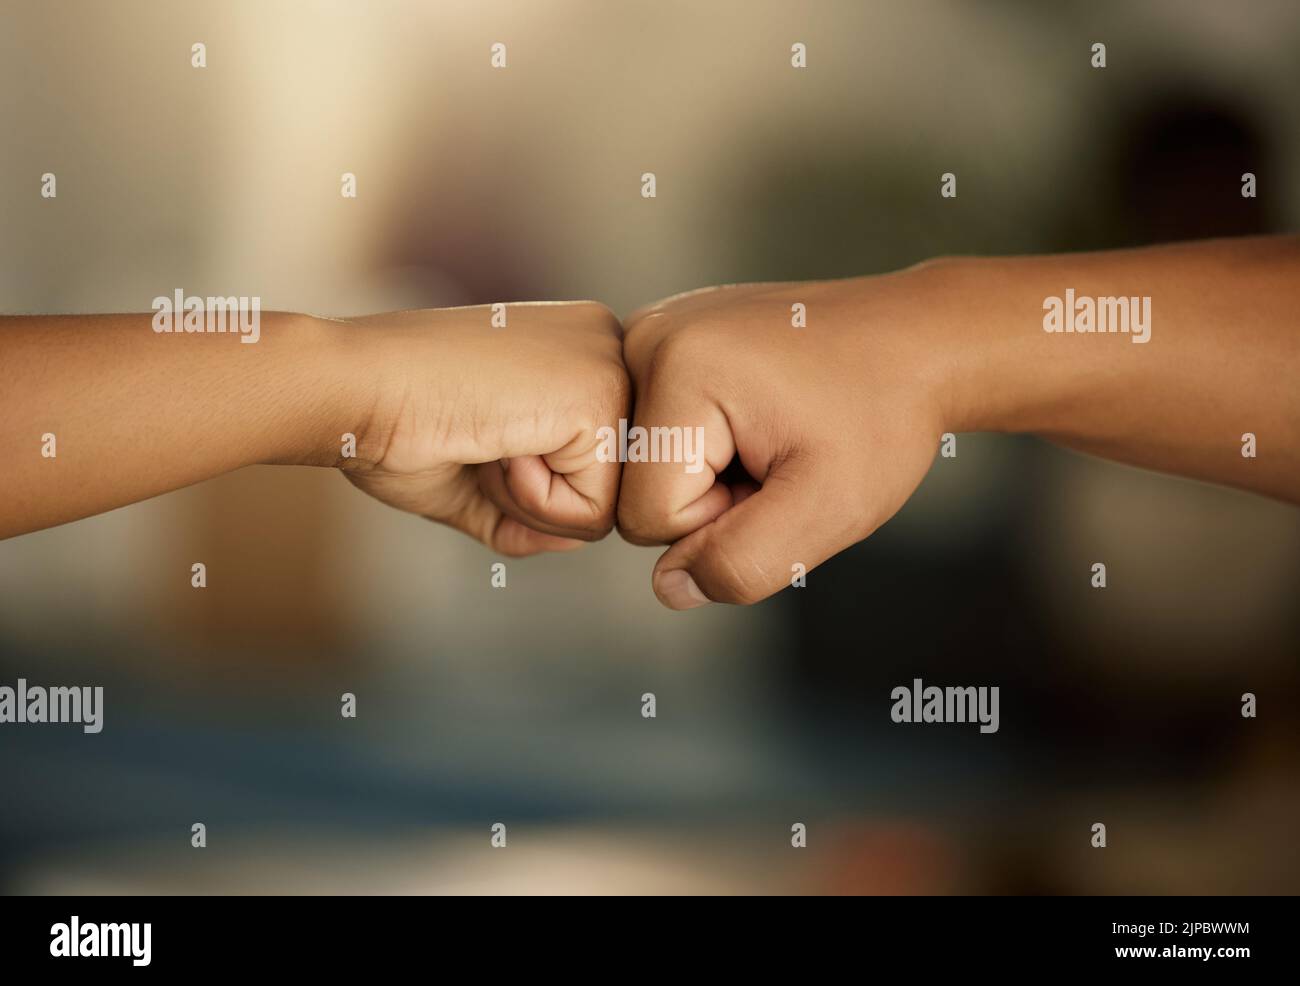 Power, teamwork and solidarity fist bump gesture of people showing support, success or achieving goal. Celebrating, winning hands doing greeting as Stock Photo